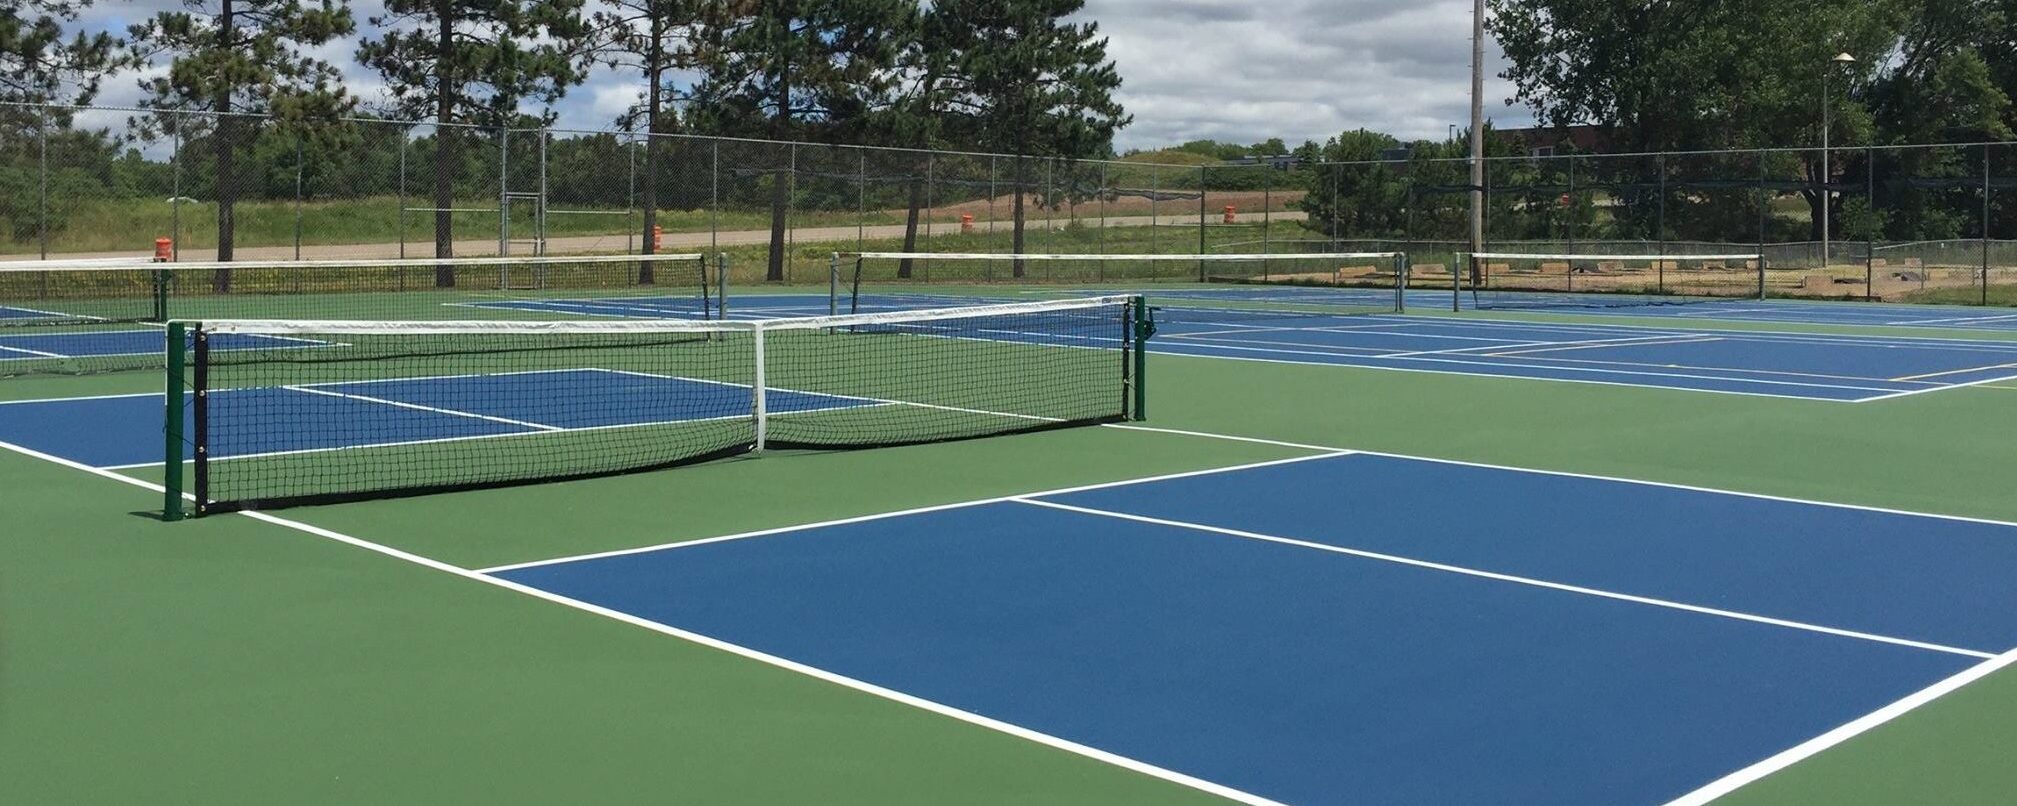 Pickleball Courts at Northland Park